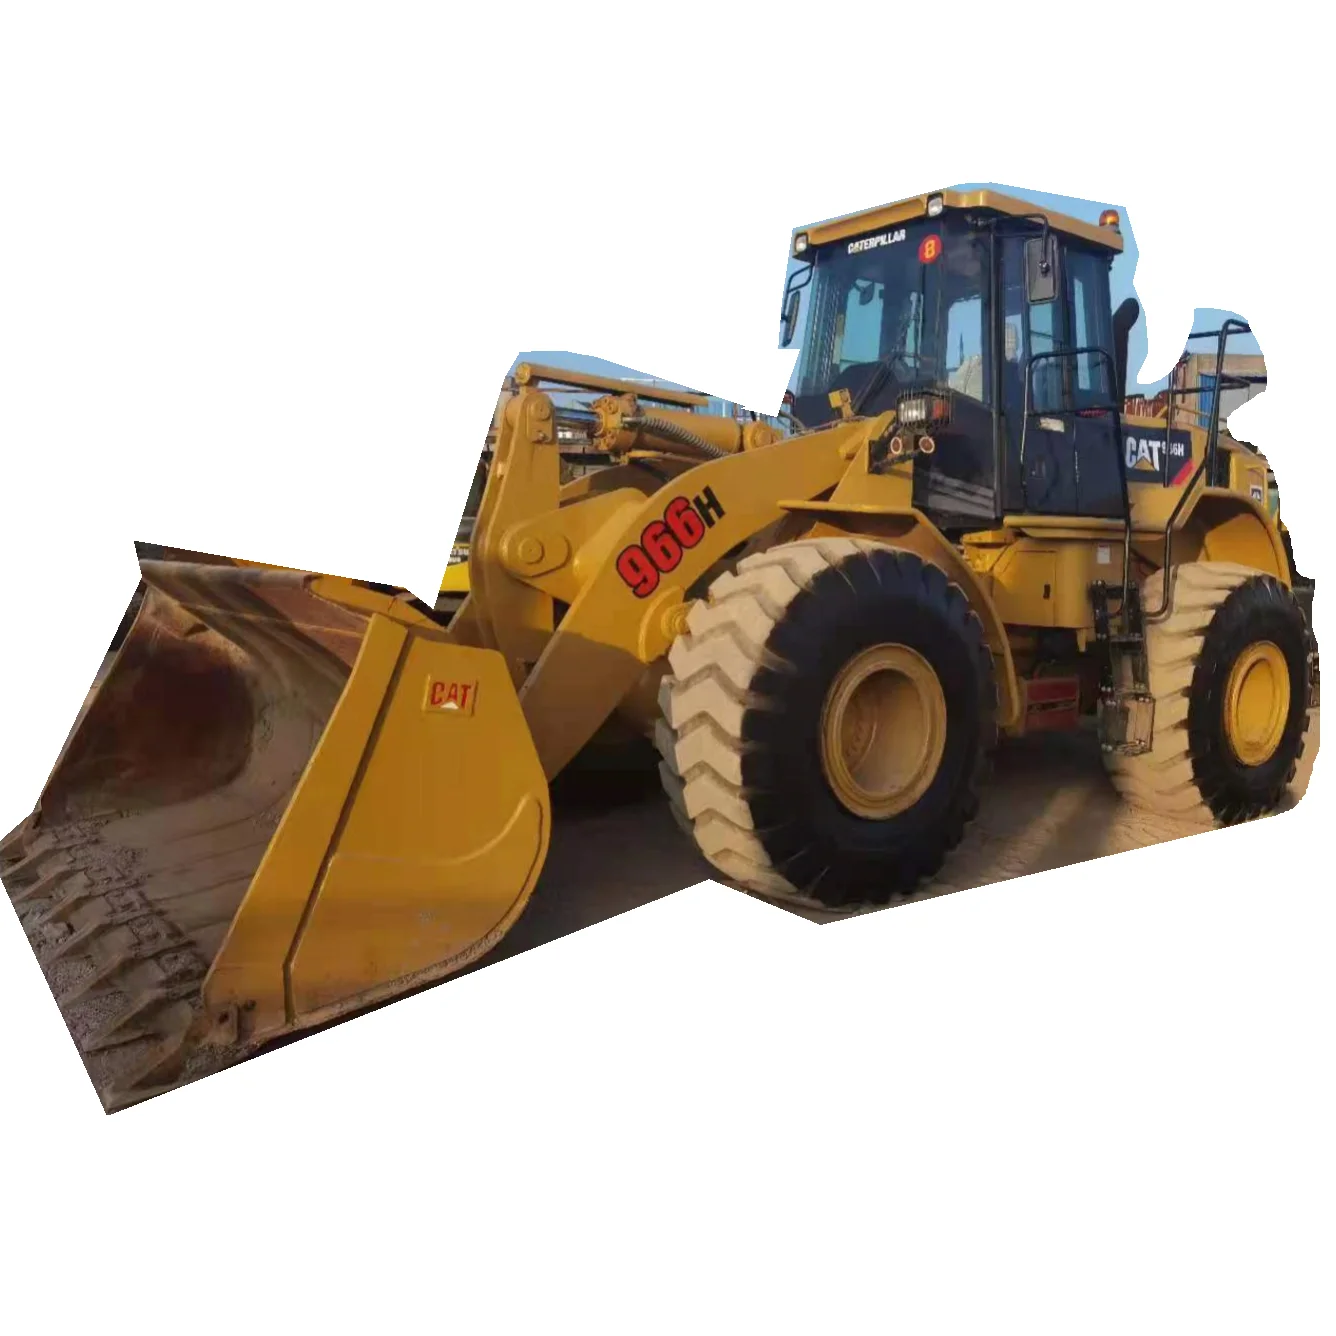 Cheap second-hand wheel loader CAT 966H/Crawler 966/950G/962H/950E/966G/ with high operating efficiency and low price